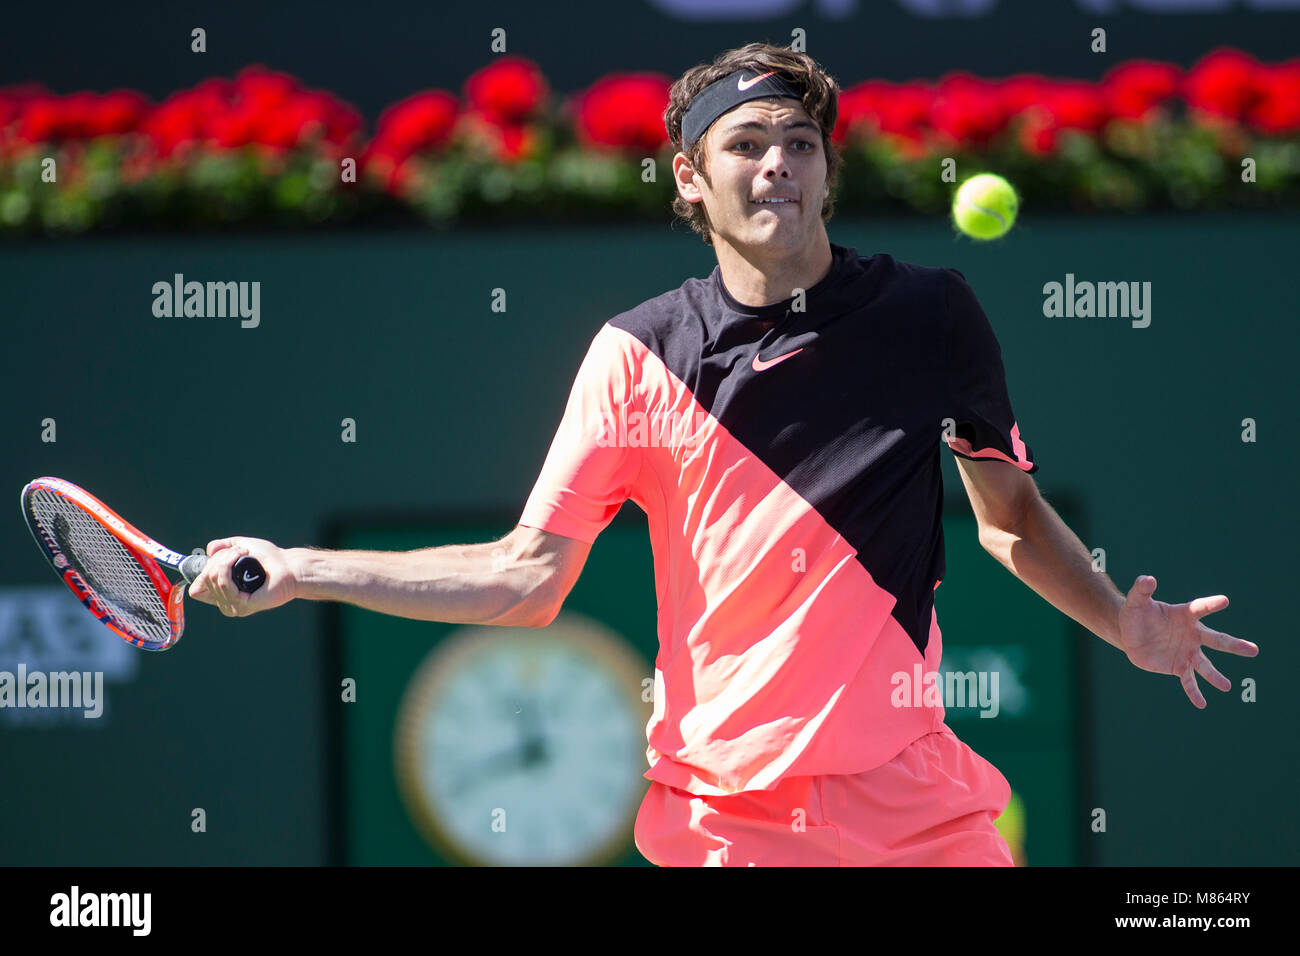 Indian Wells, California, USA. 14th Mar, 2018. Taylor Fritz (USA) defeated by Borna Coric (CRO) 6-2, 6-7(6), 6-4 at the BNP Paribas Open played at the Indian Wells Tennis Garden in Indian Wells, California. © Mal Taam/TennisClix/CSM/Alamy Live News Stock Photo